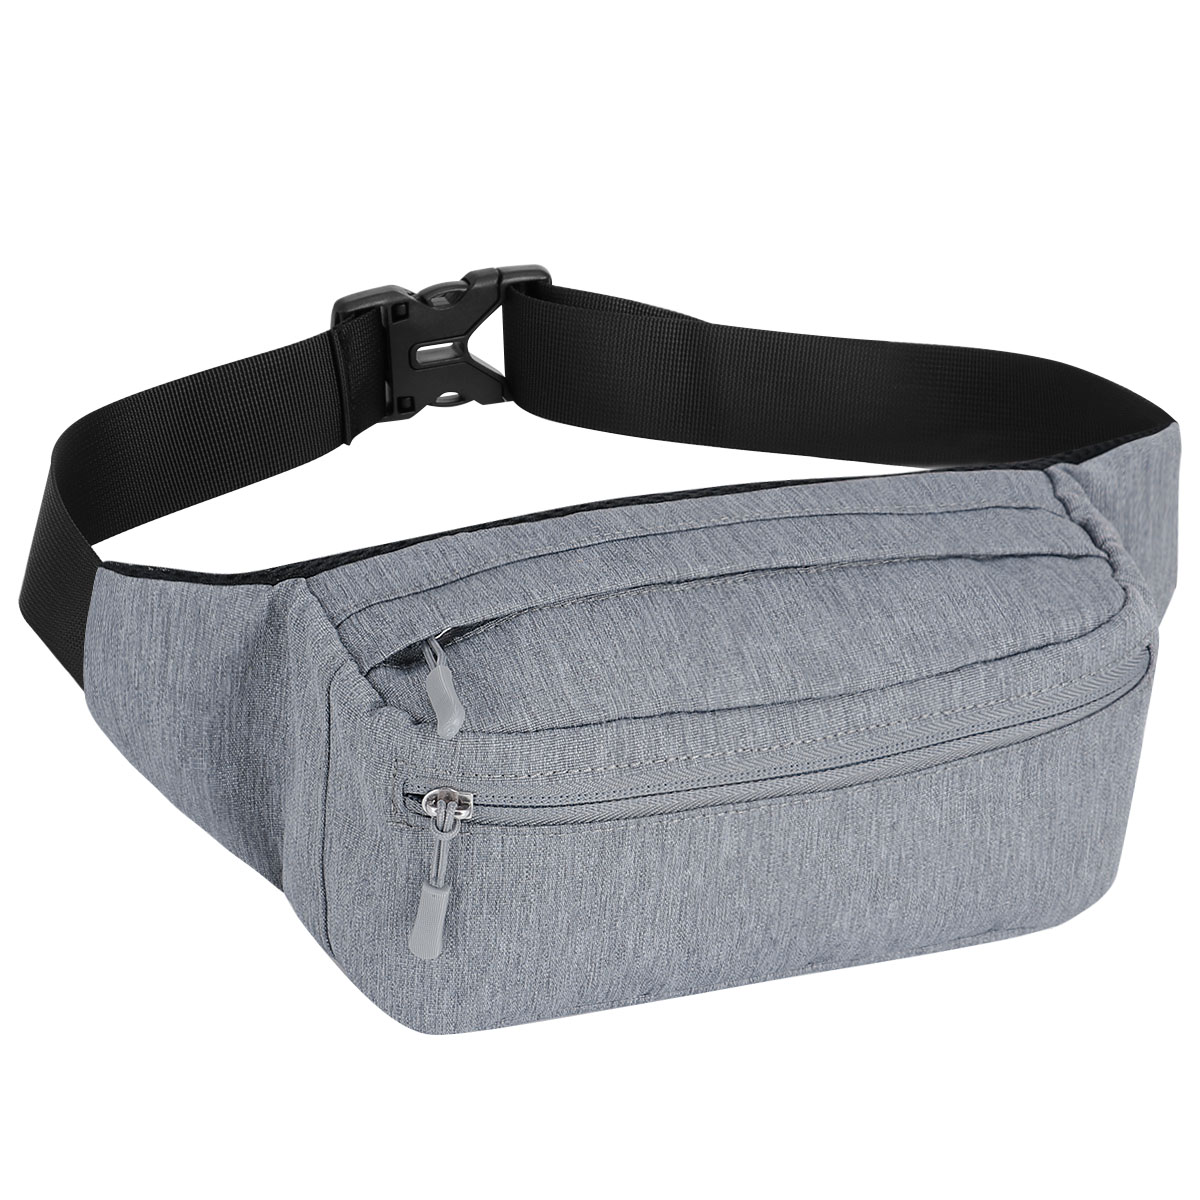 HAWEE Unisex Fanny Pack-Crossbody Sling Backpack Running Waist Pack Belt Hip Bag for Travel Sport Hiking Cycling - image 1 of 6